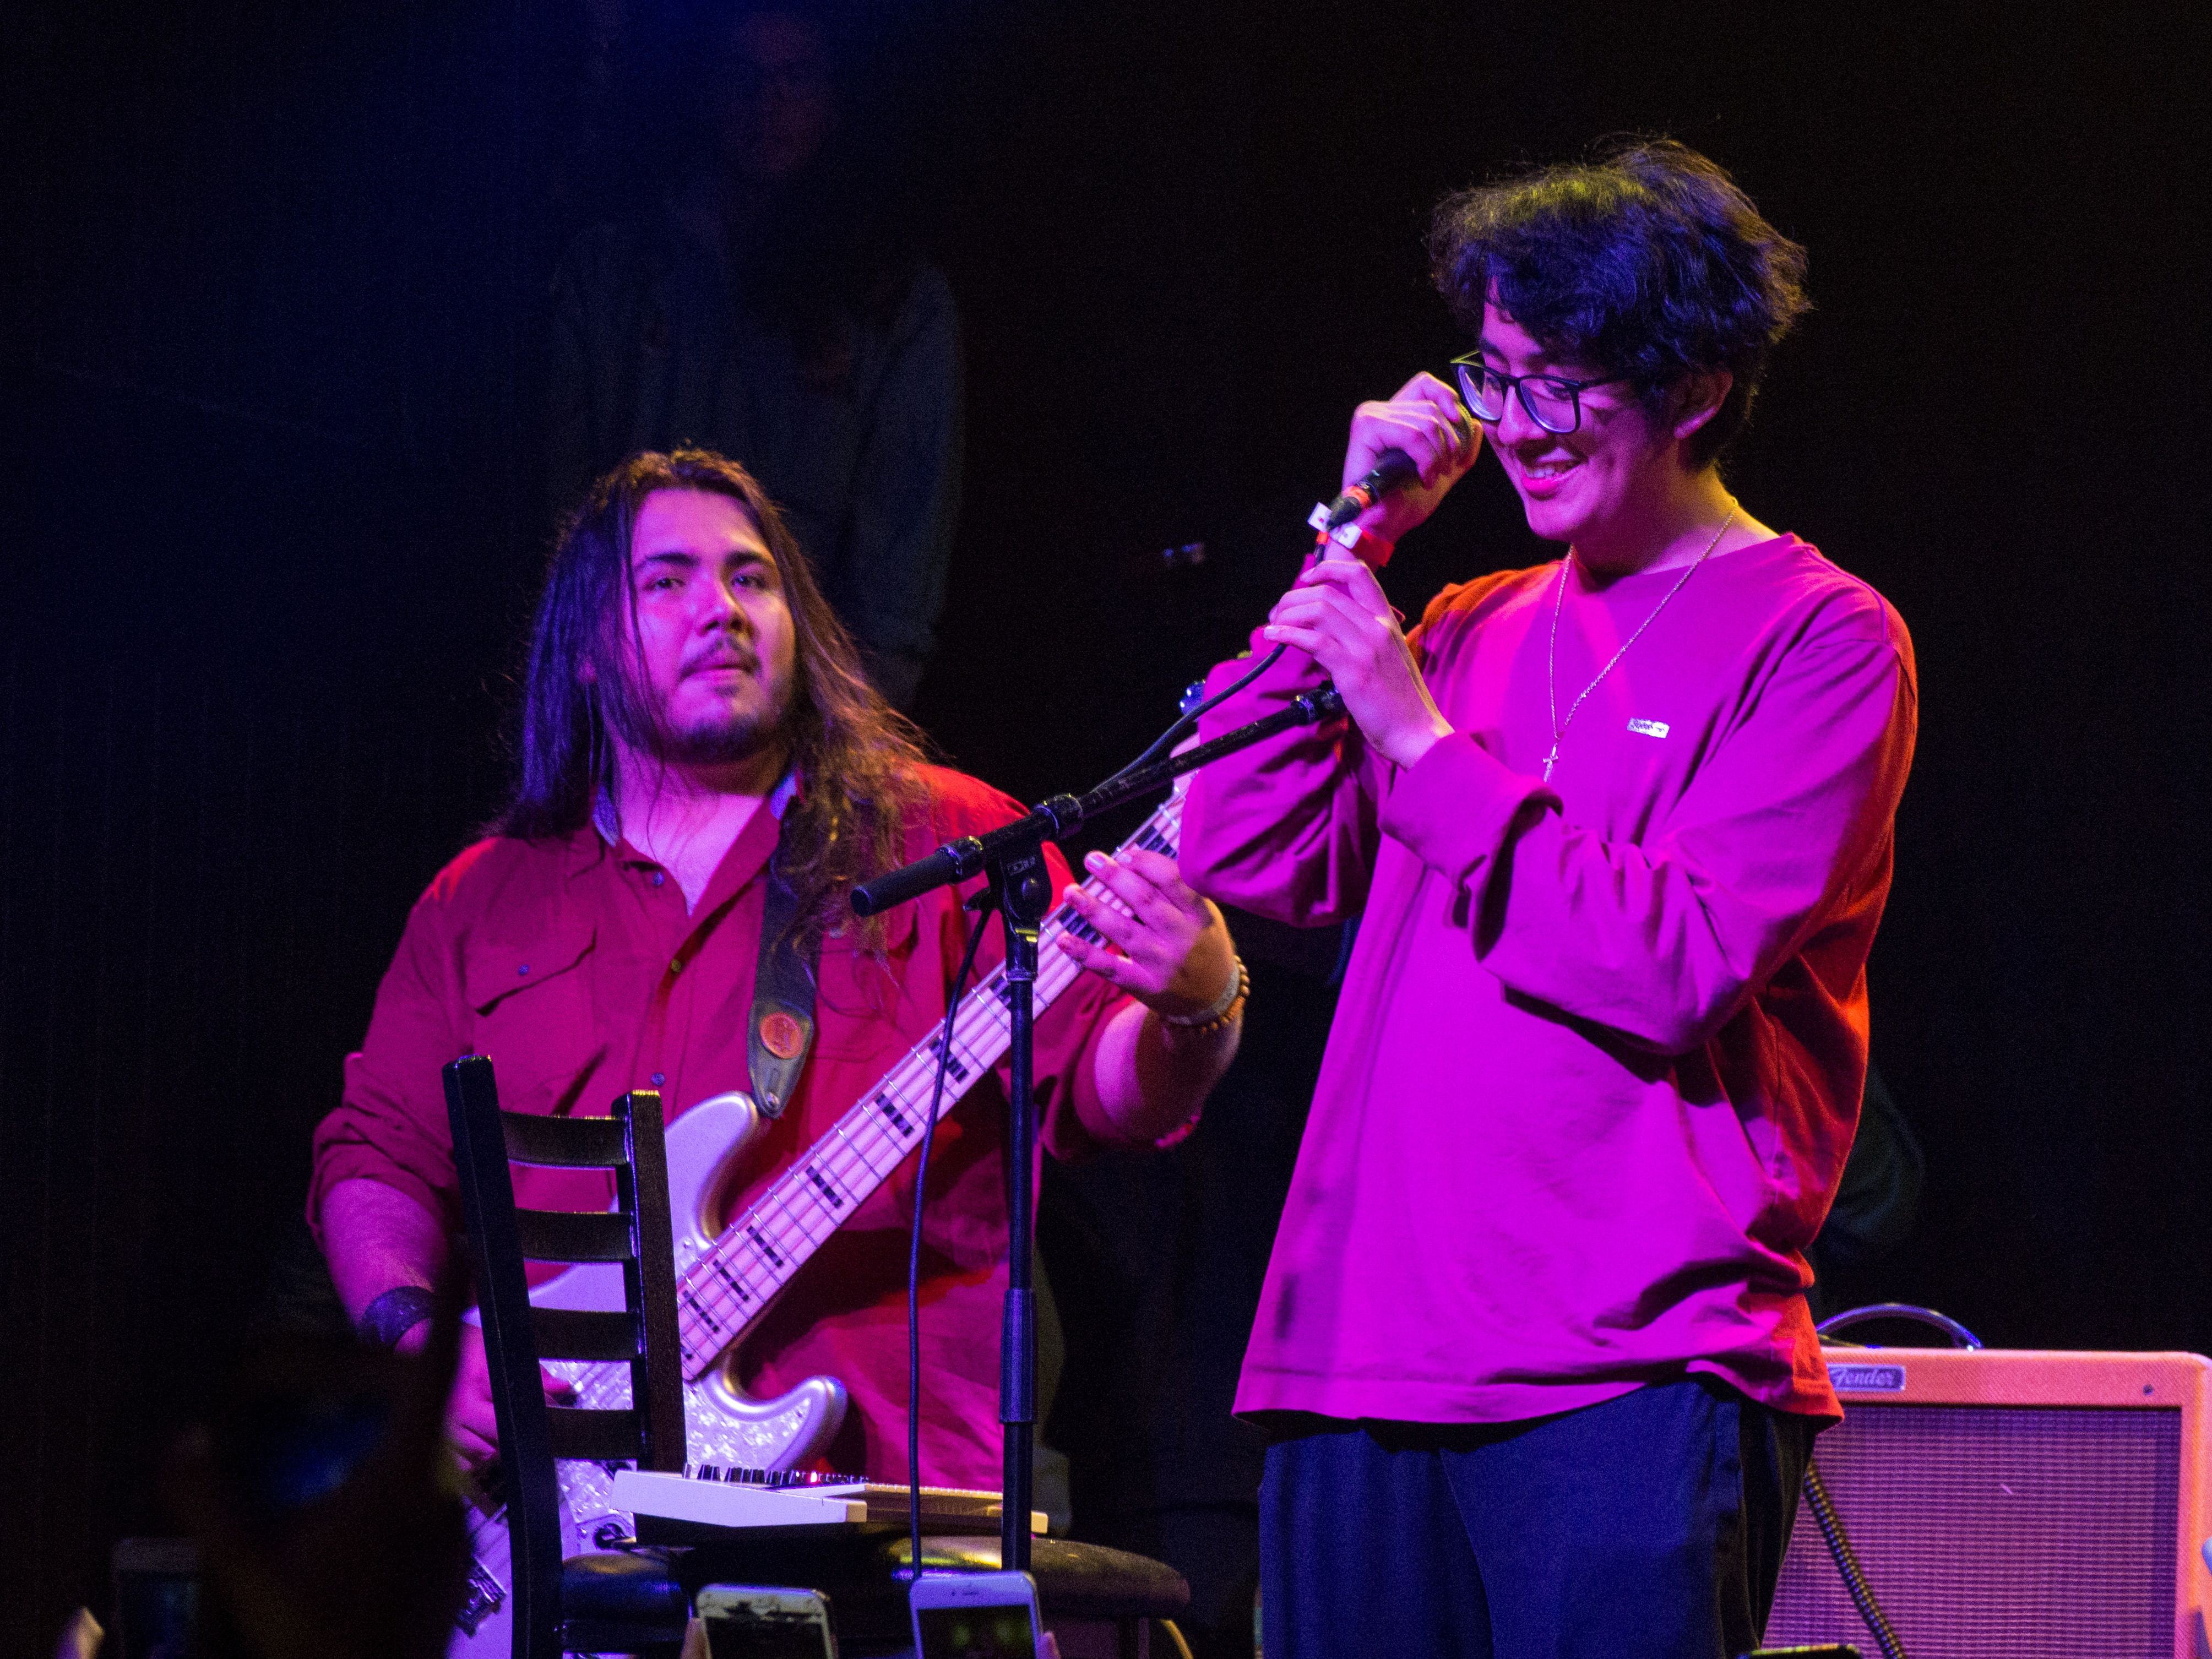 Cuco's First Dallas Performance Inspires Listeners